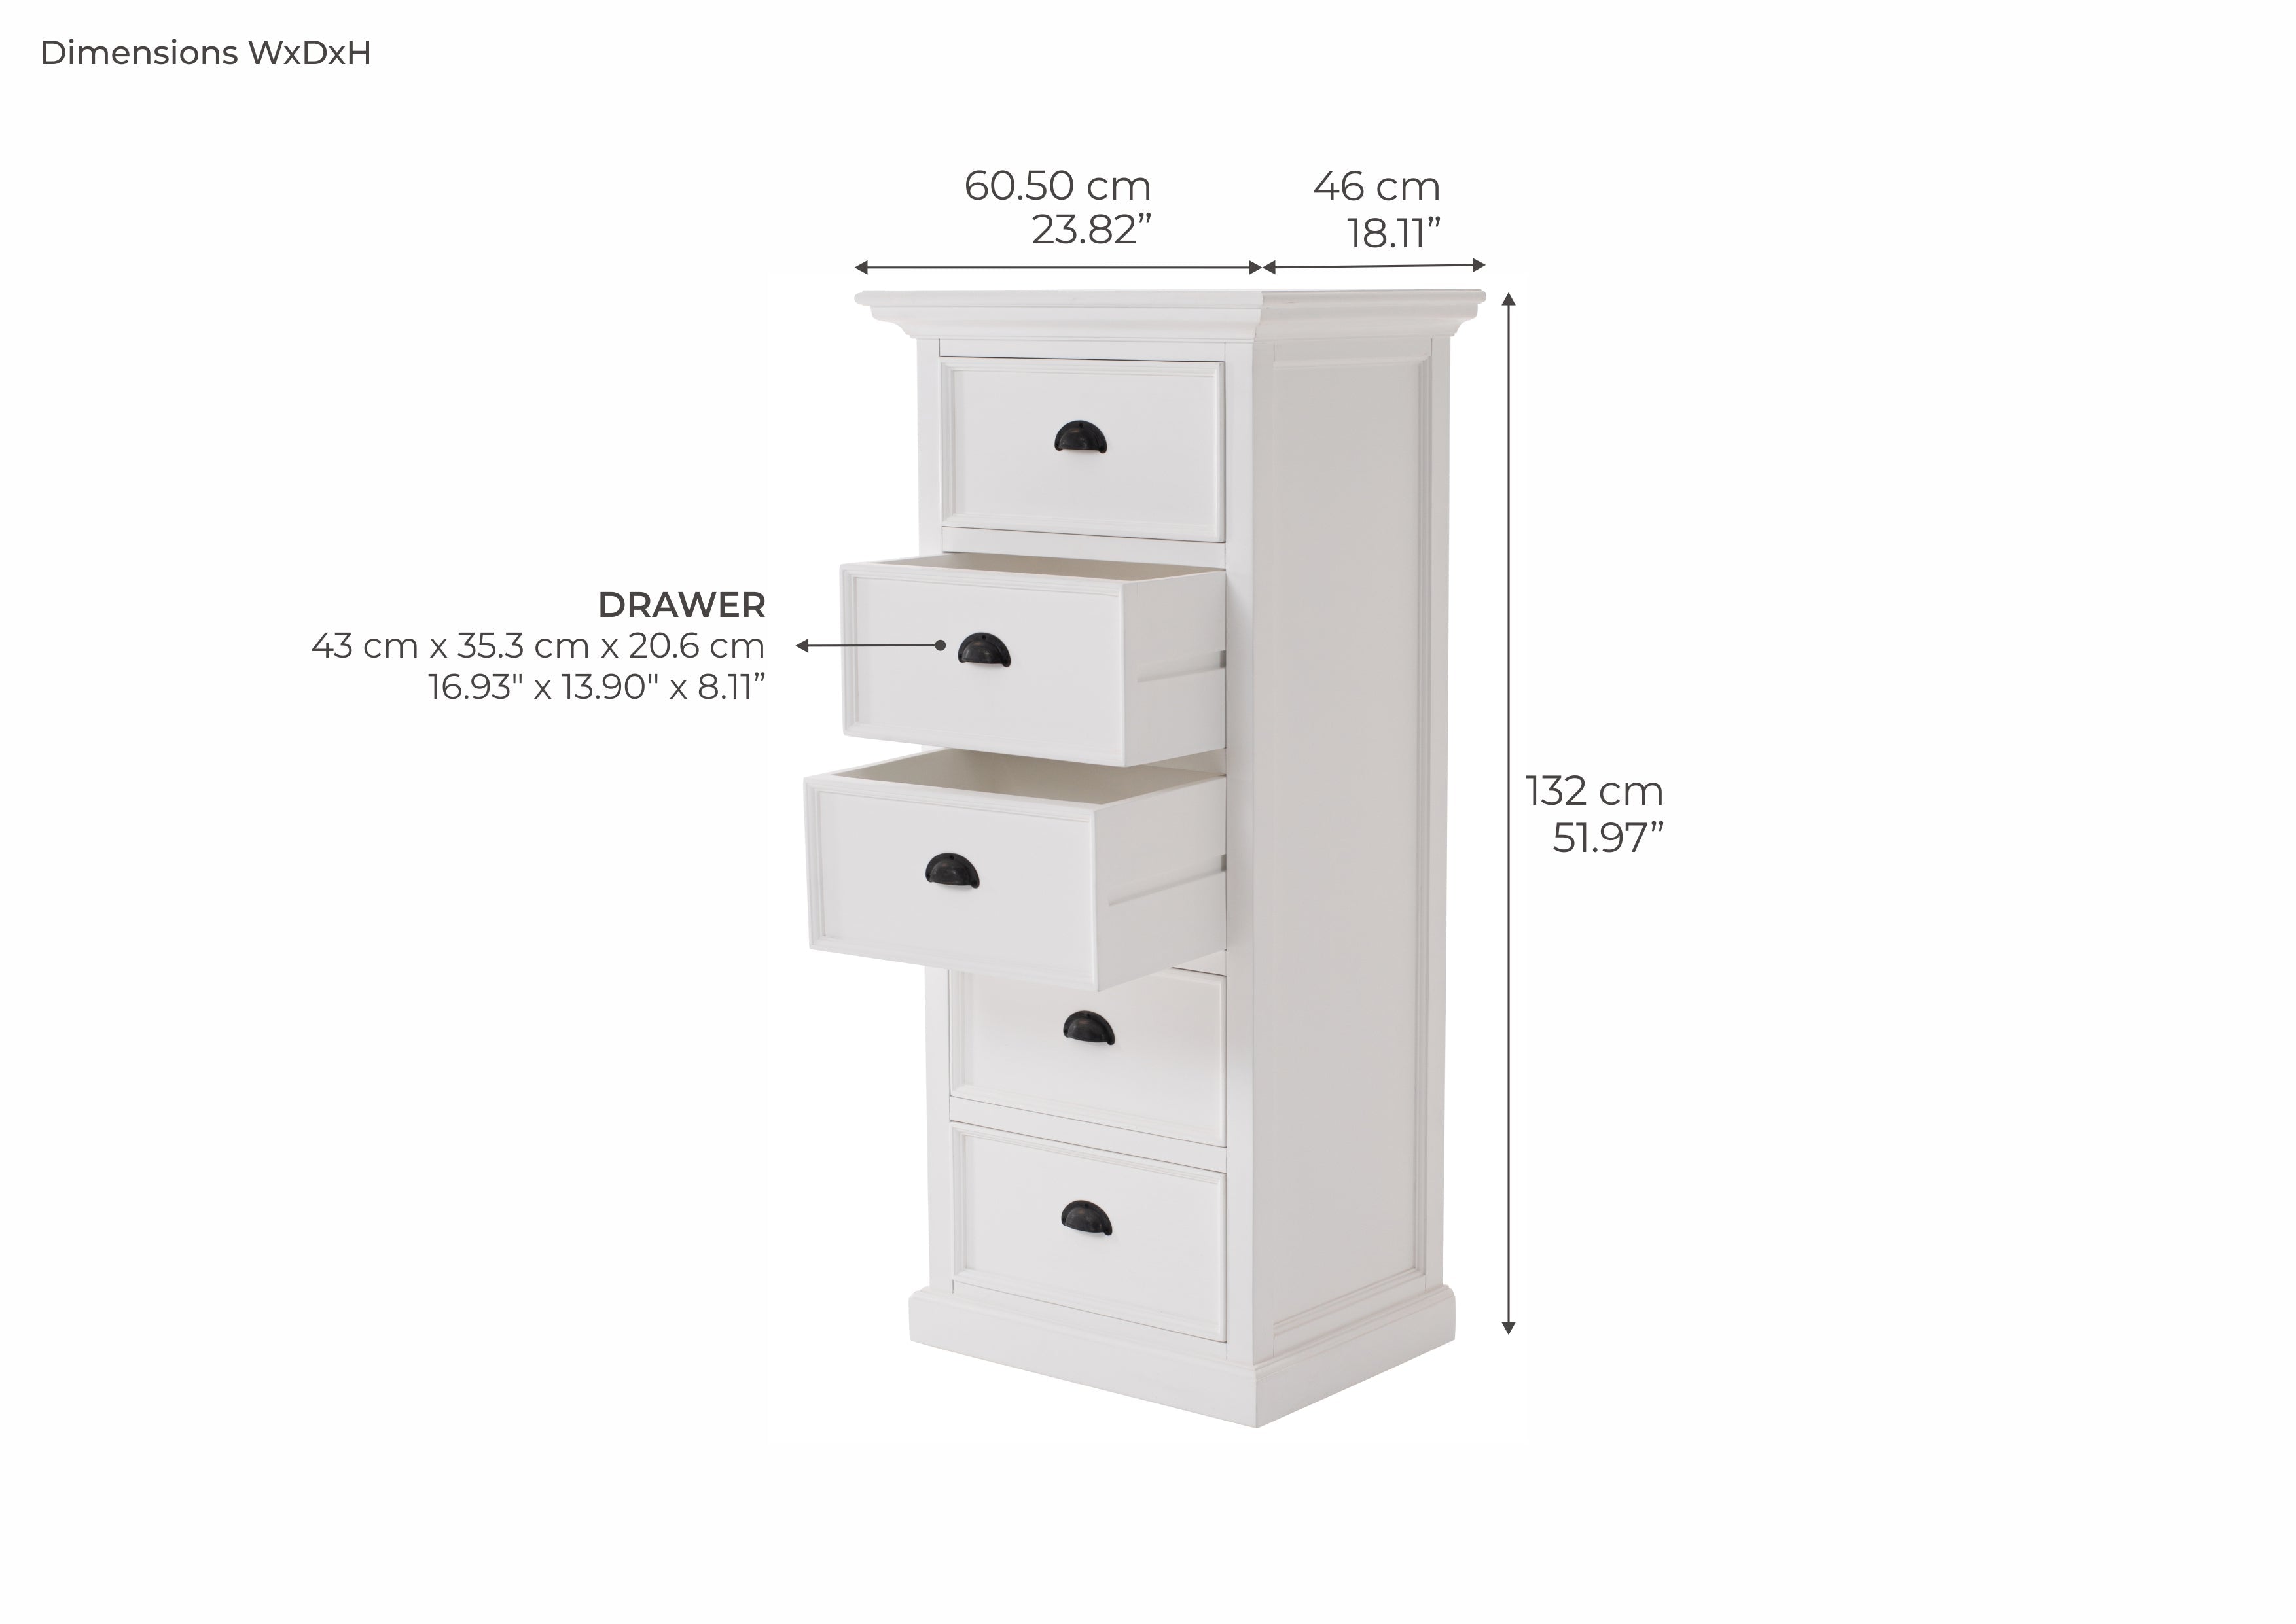 Halifax Grand Small dresser with drawers